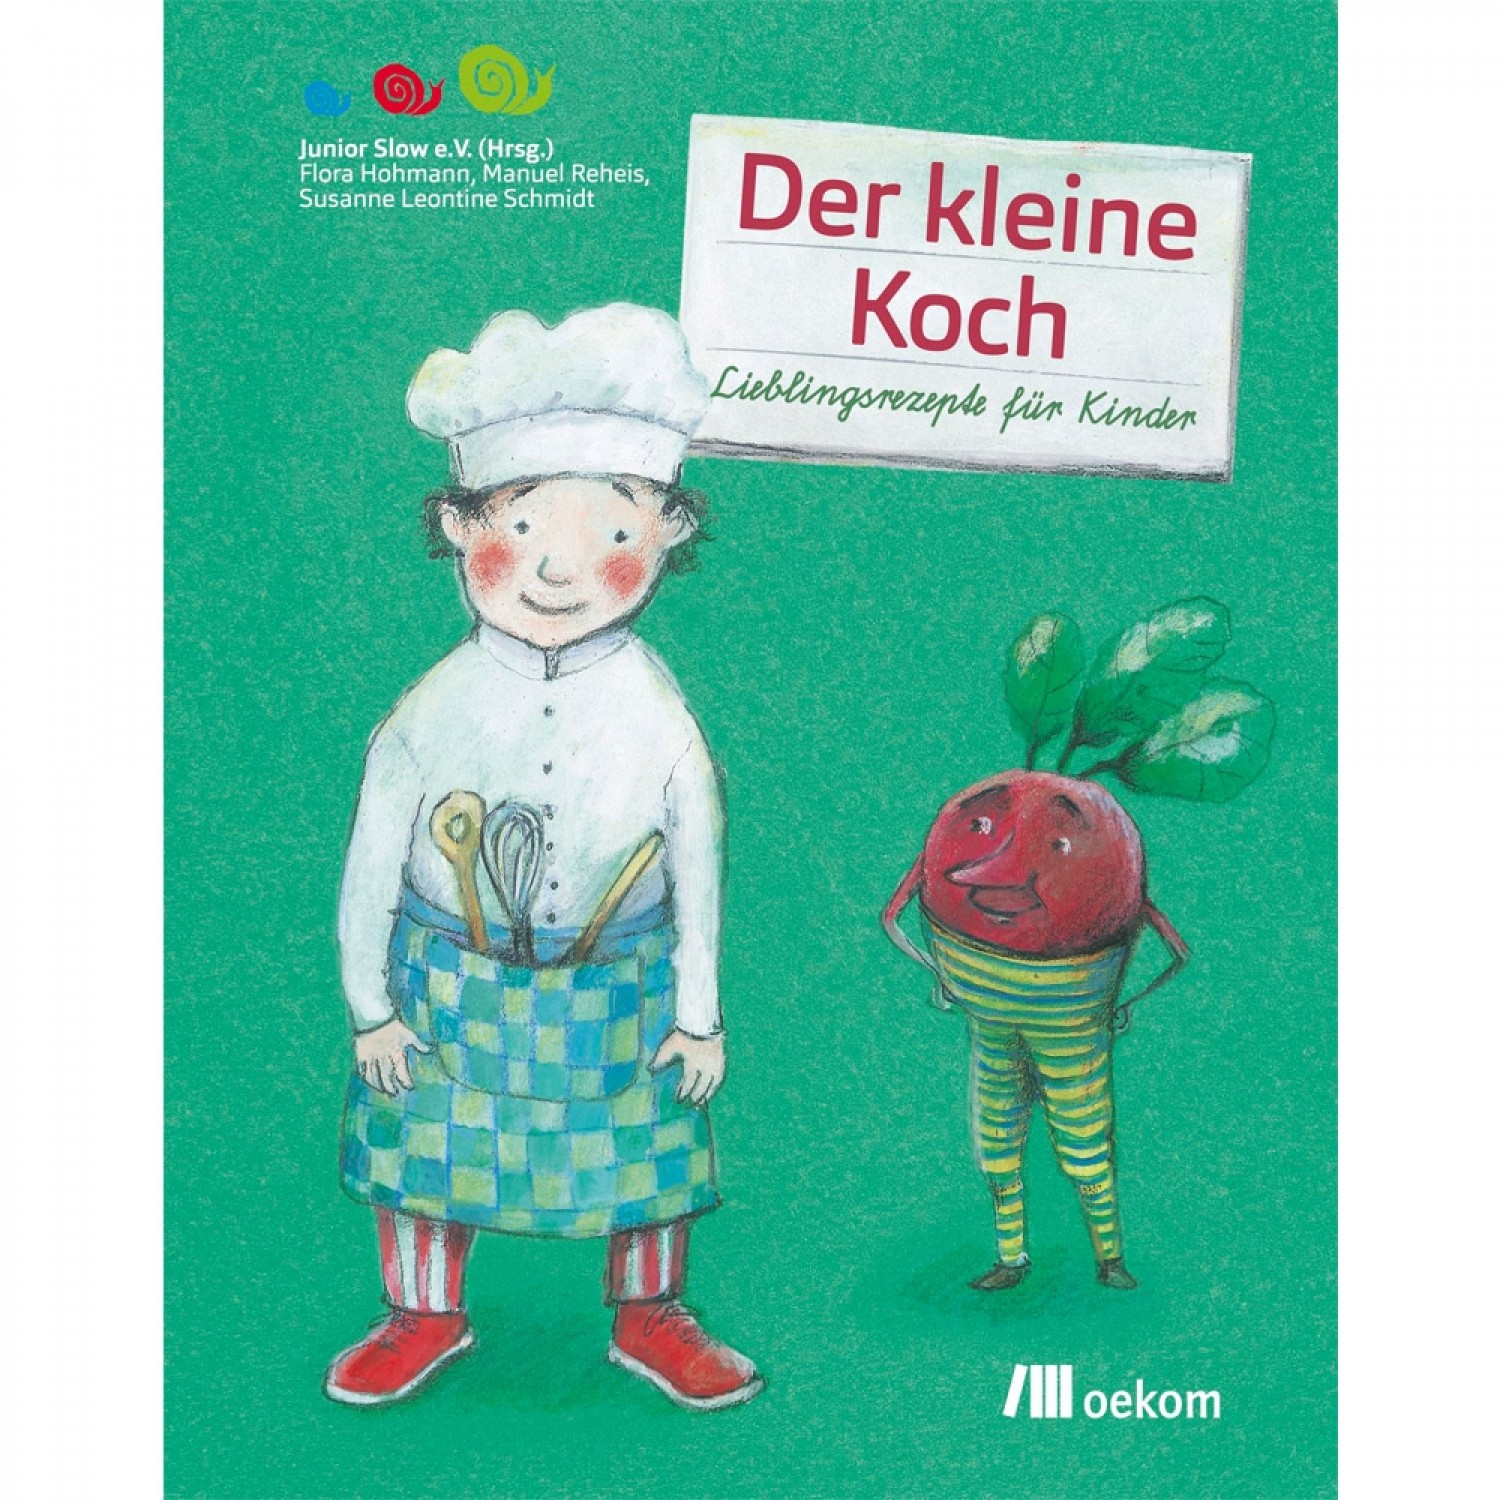 The little chef - German recipes for children | oekom publisher